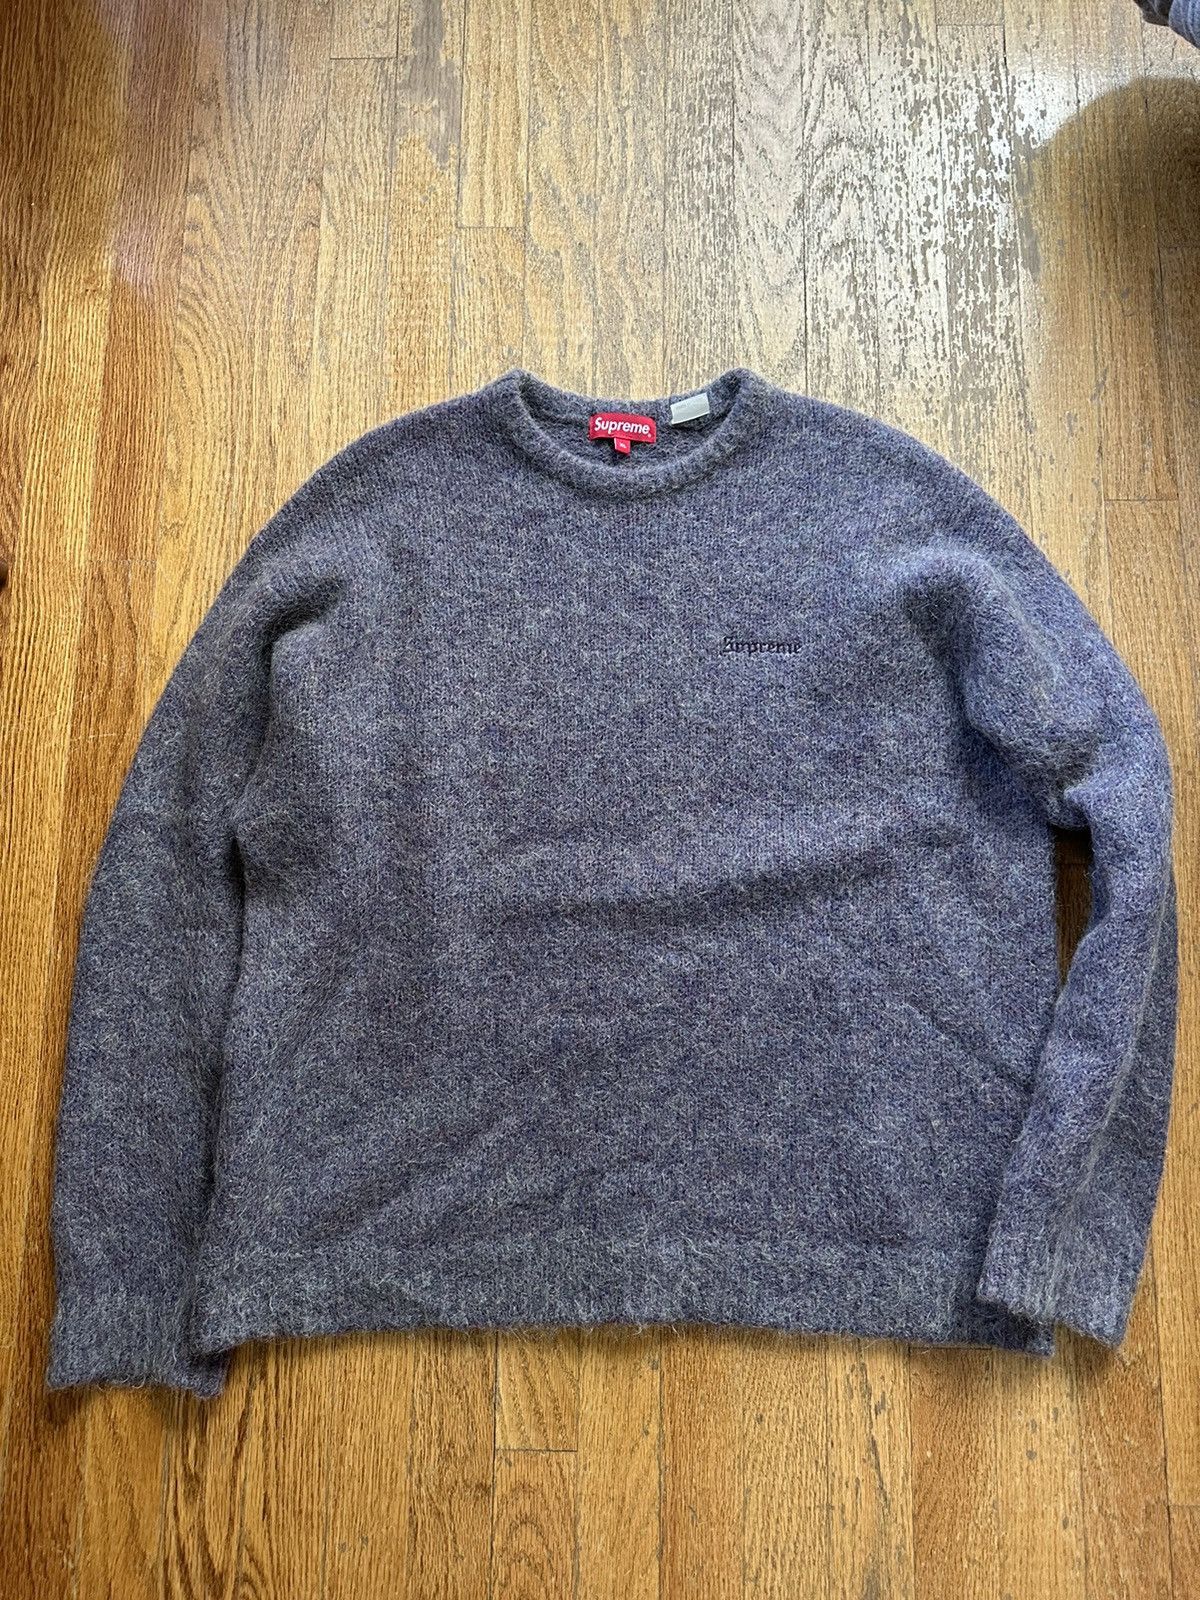 Supreme Mohair sweater | Grailed